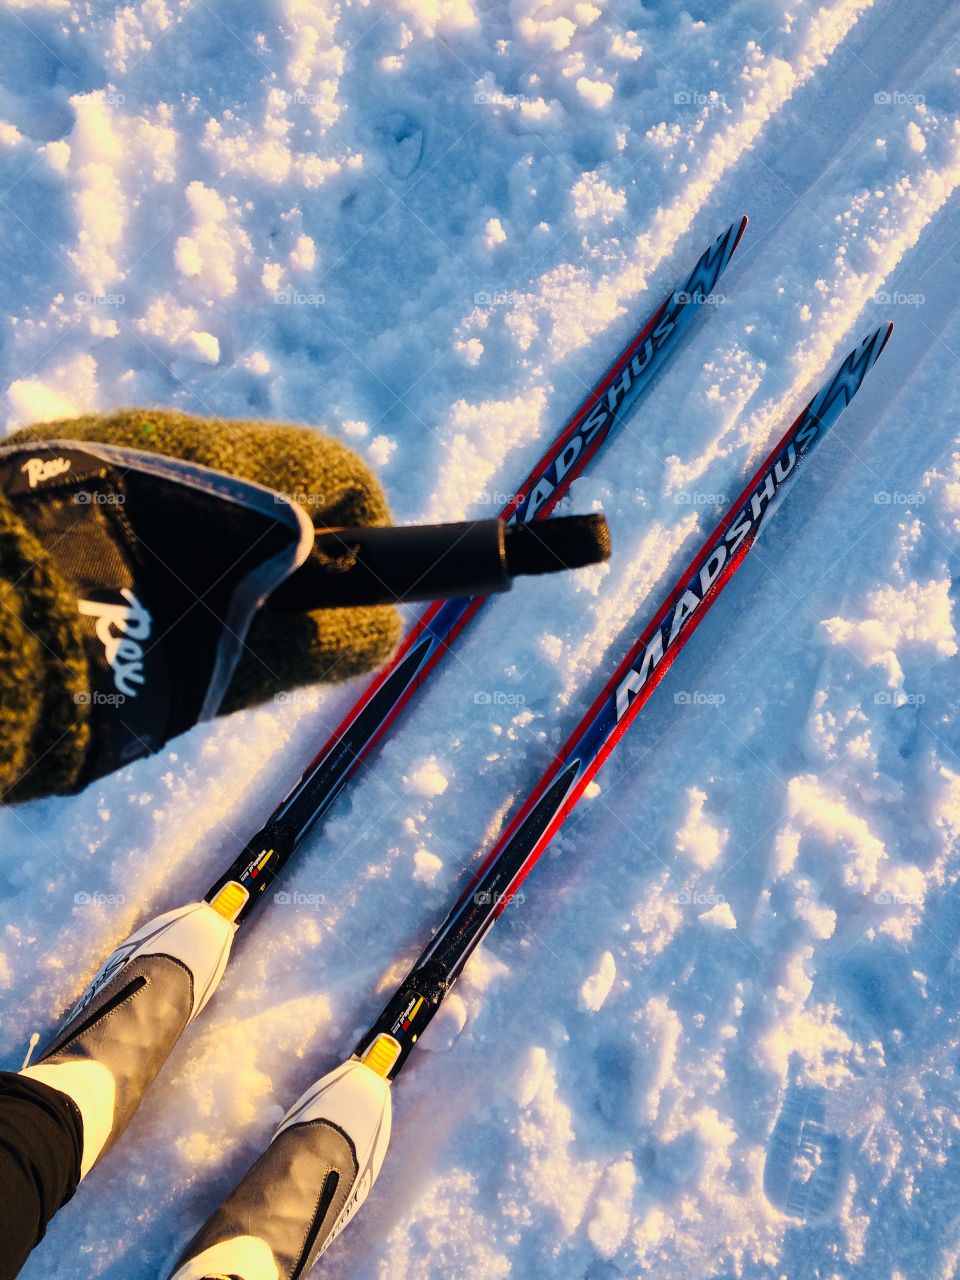 Cross country skiing on a Frozen lake in Sunset 